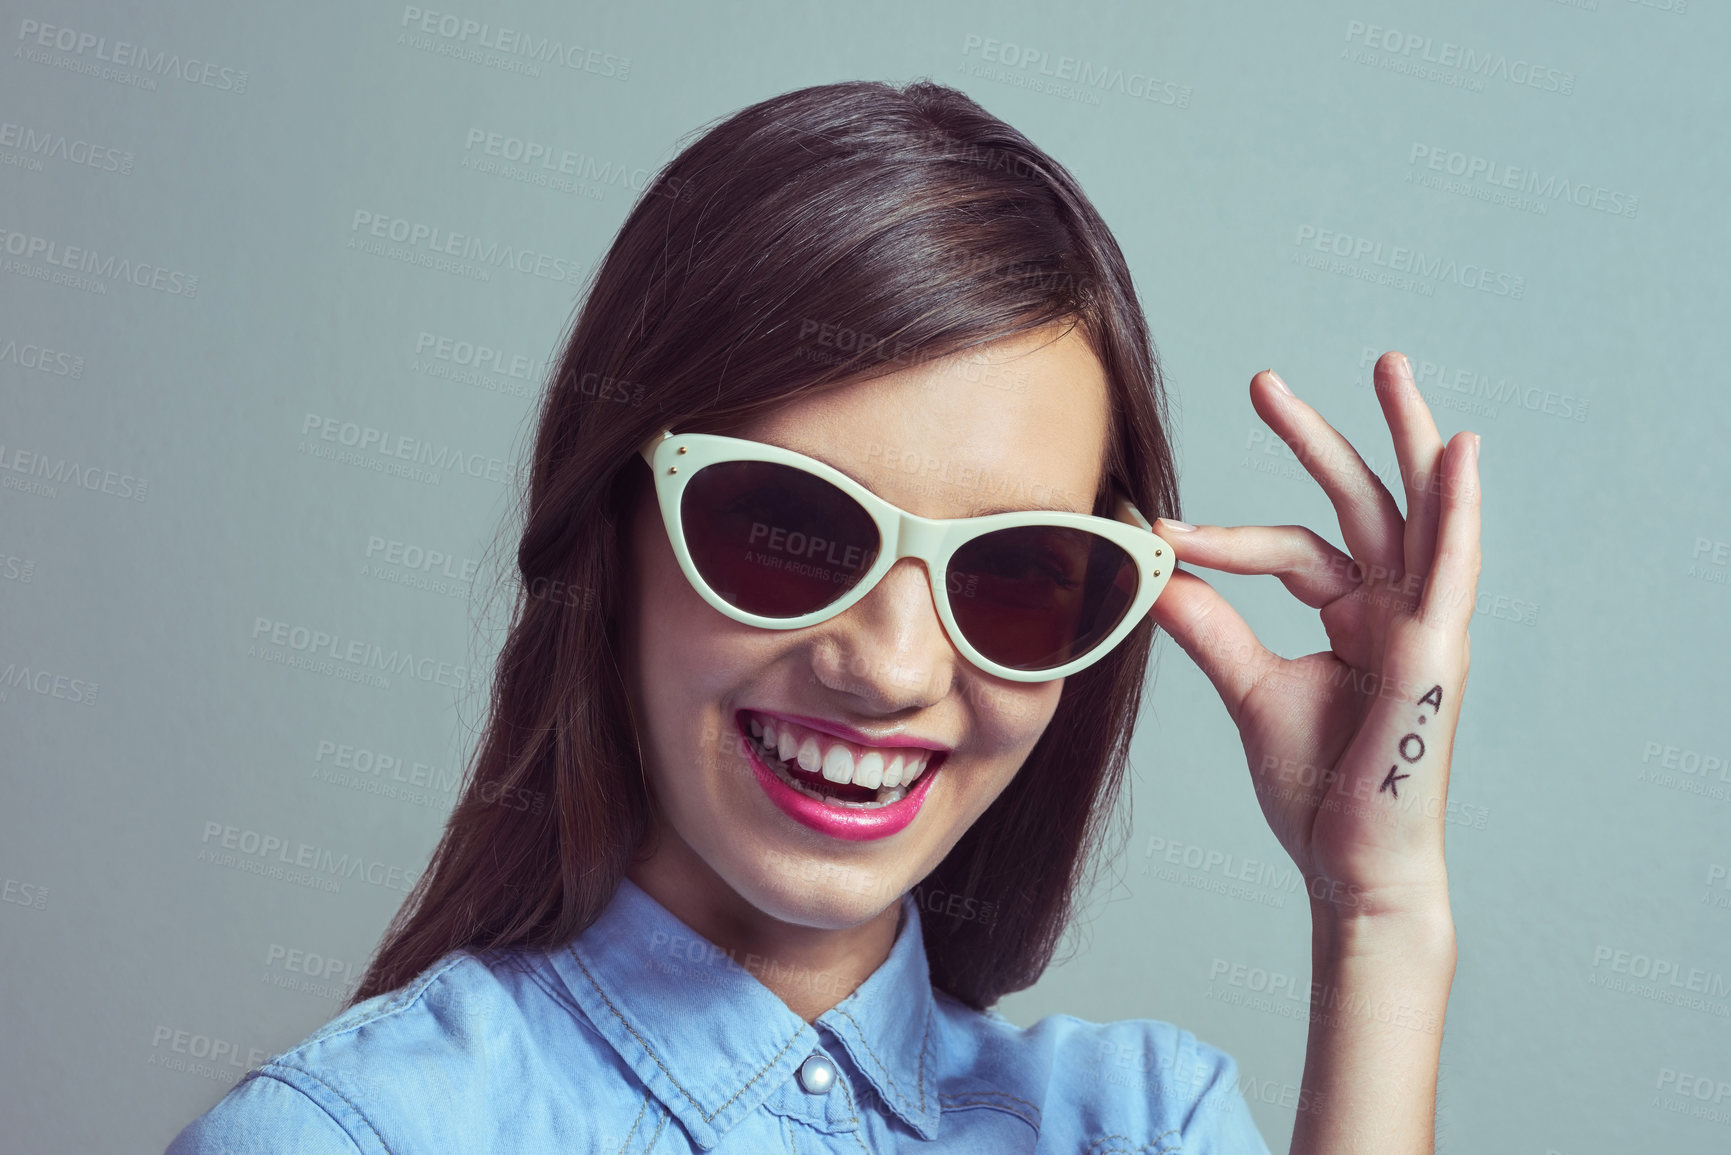 Buy stock photo Studio portrait of an attractive young woman posing with with stylish shades against a grey background